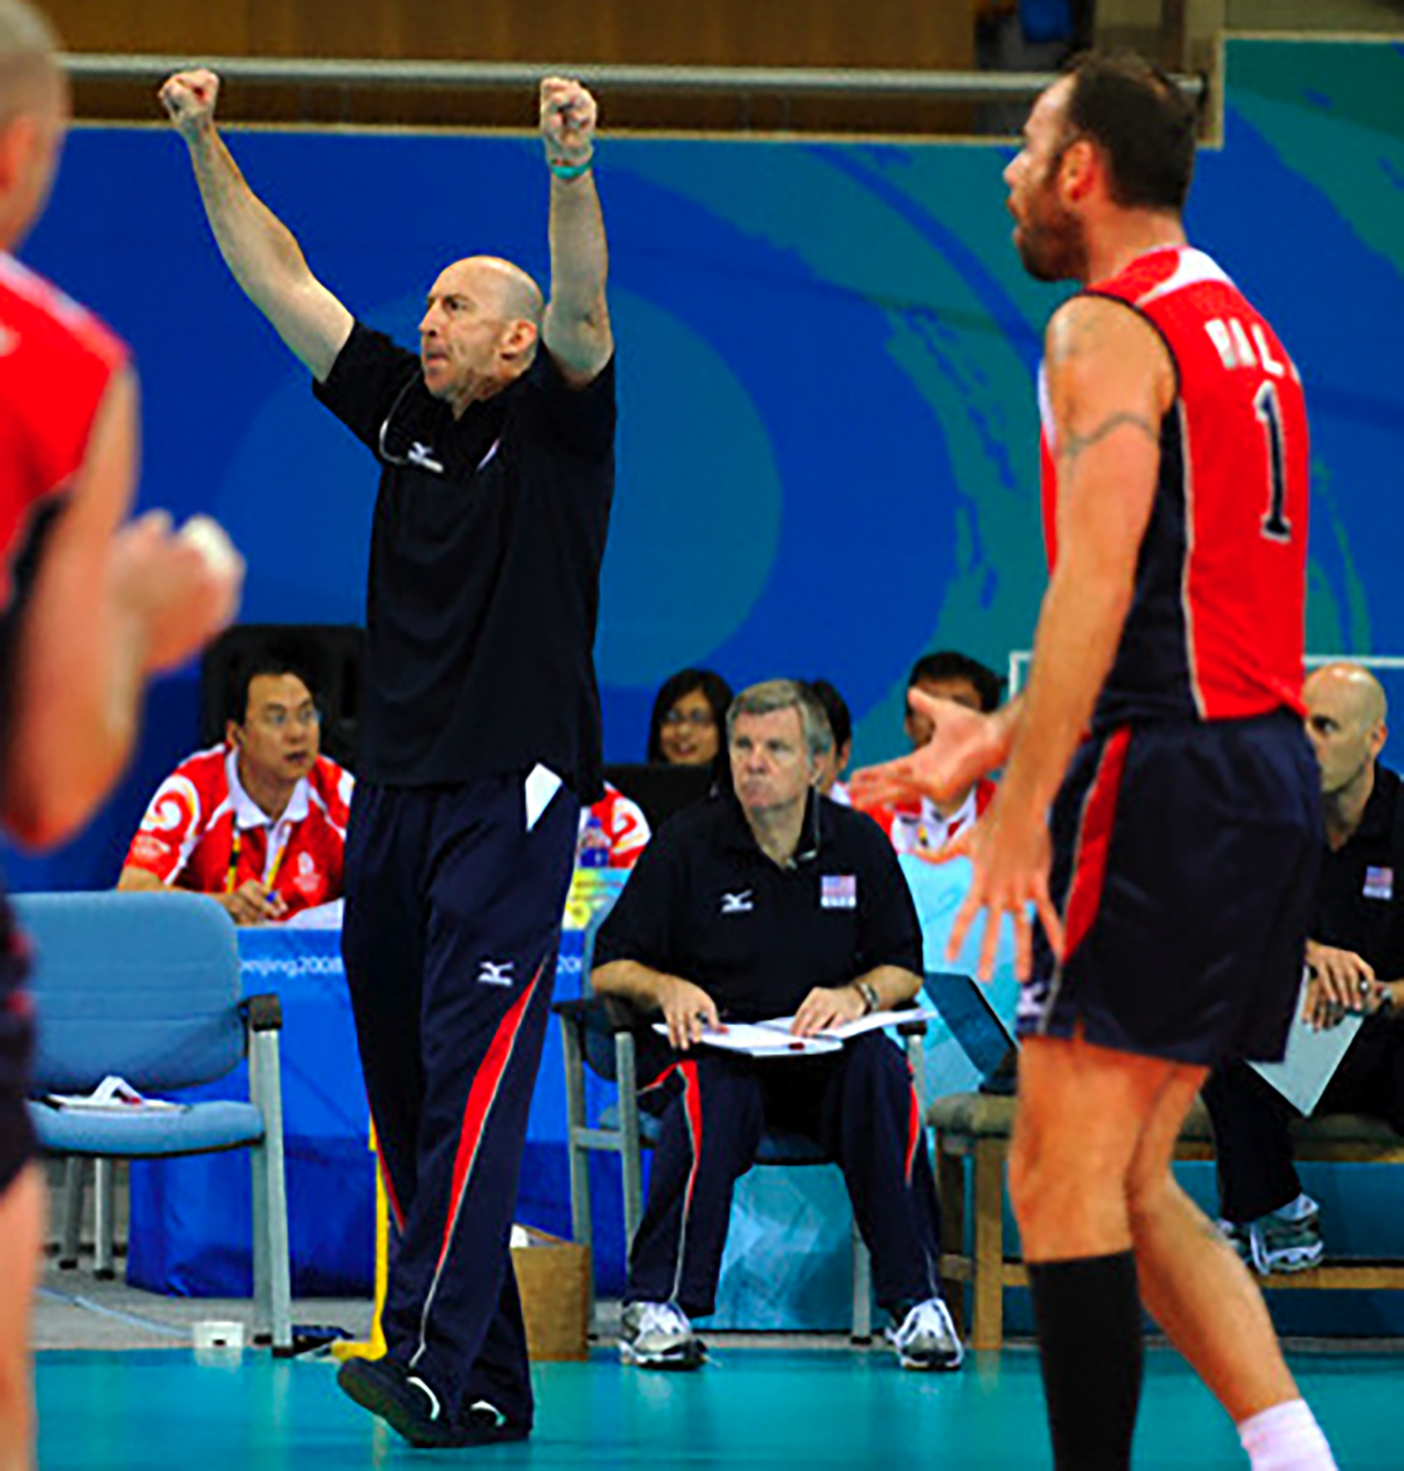 USA head coach Hugh McCutcheo celebrates a point during the final game with Brazil. Assistant coach Larsen (seated) led the team during McCutcheon's absence.